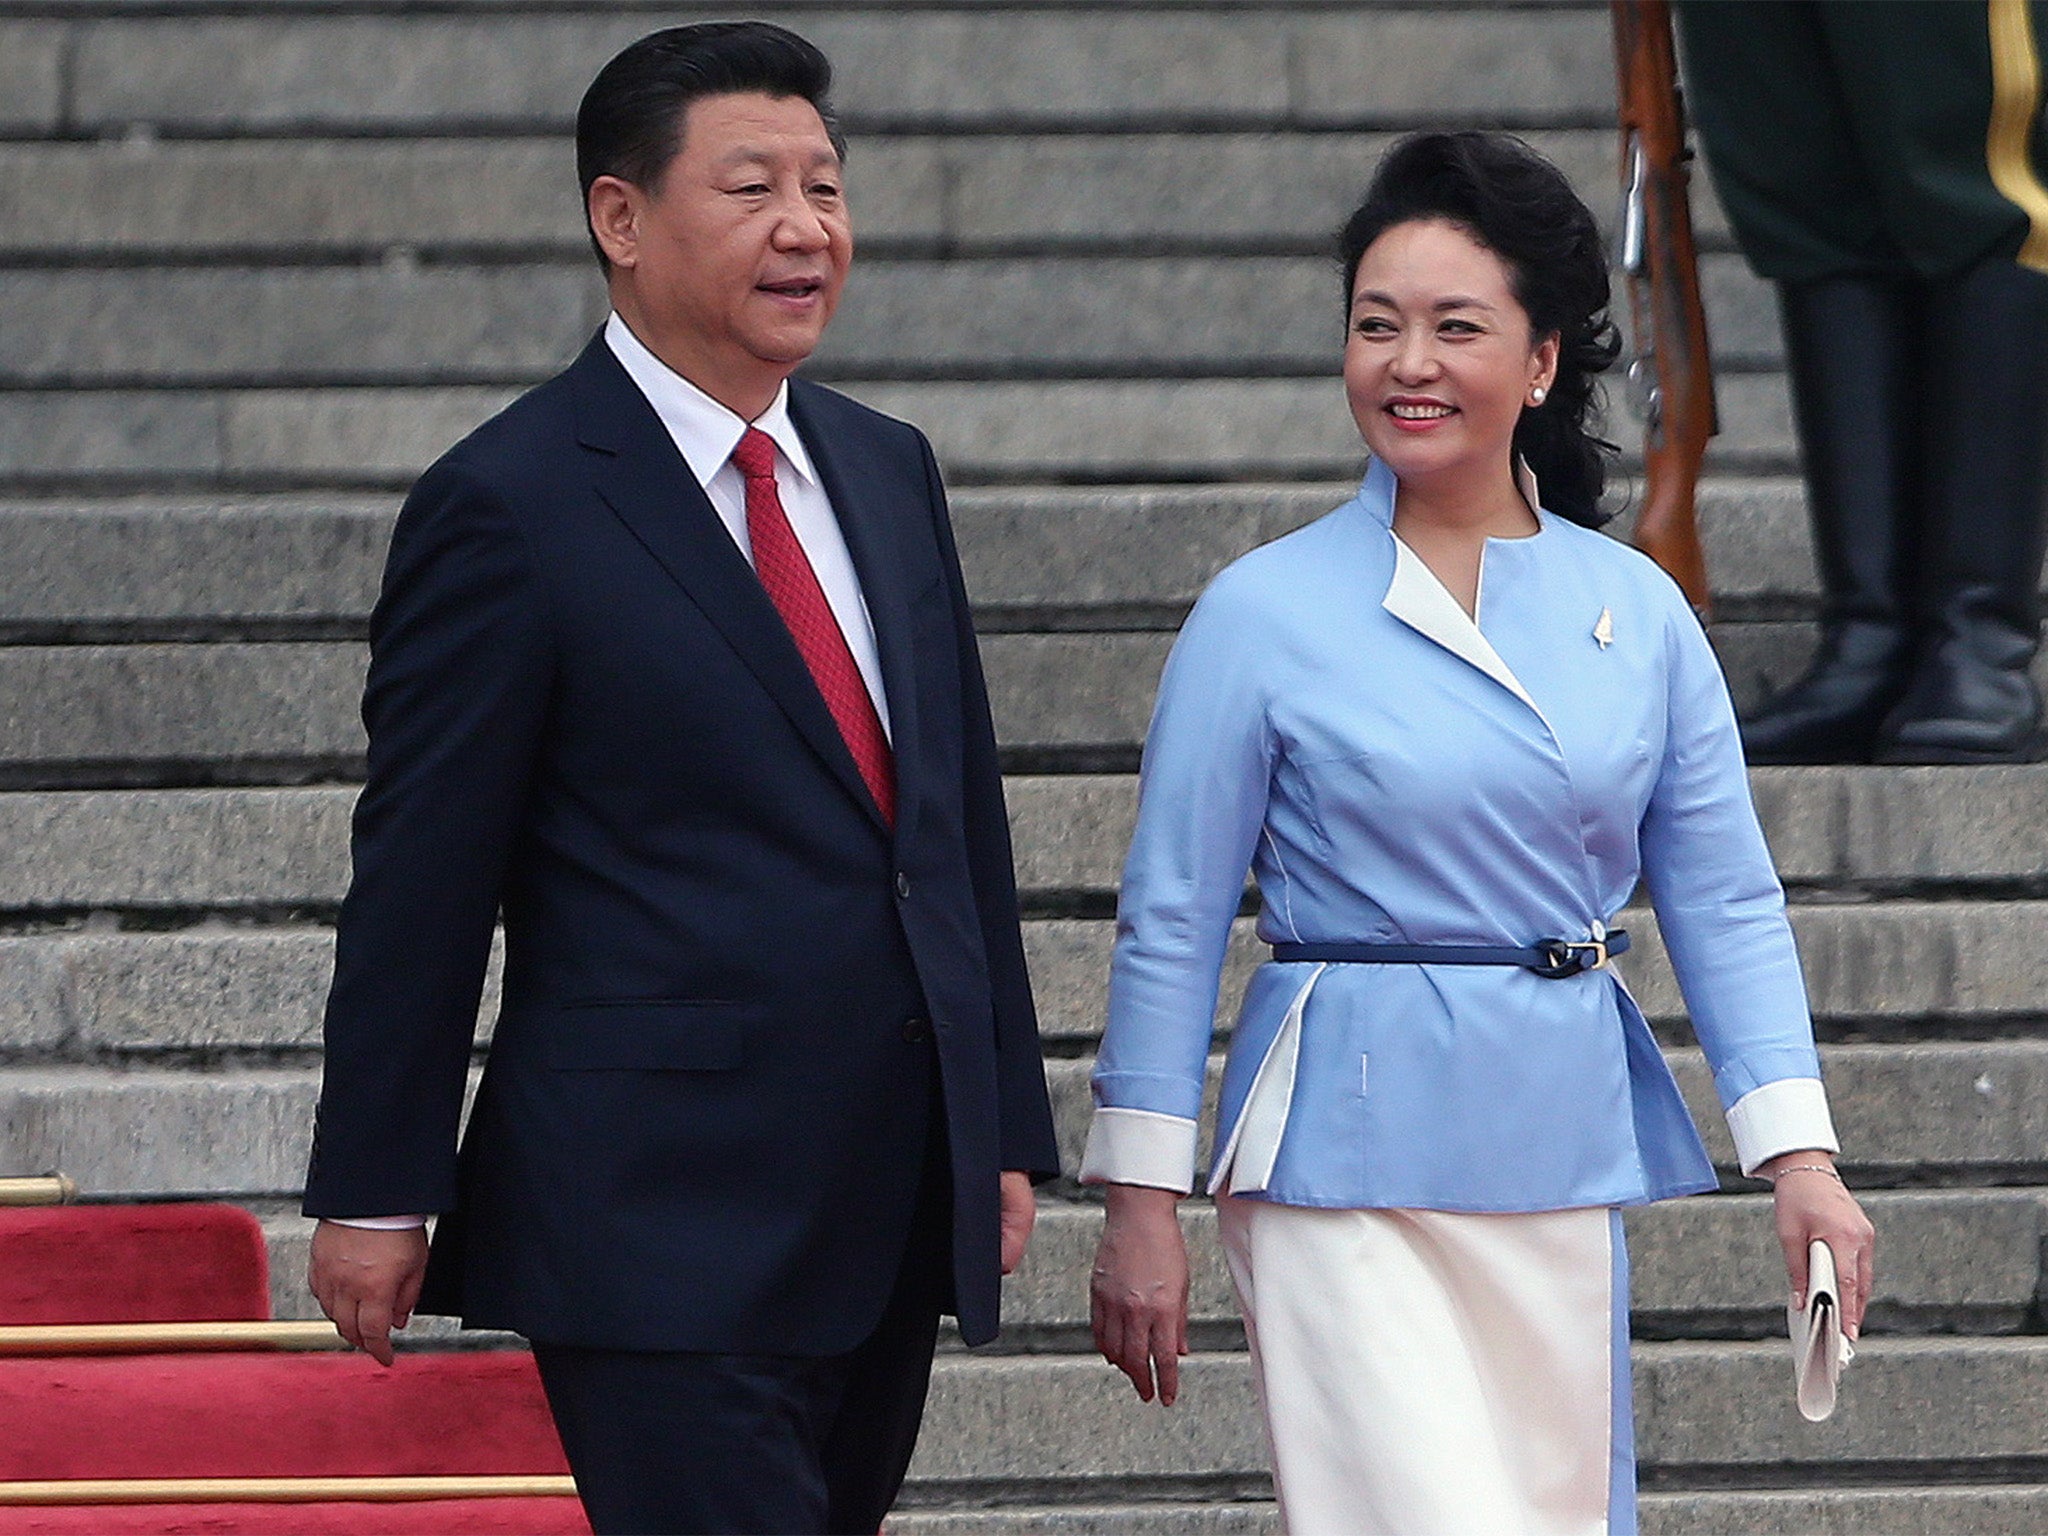 Chinese President Xi Jinping (L) and his wife Peng Liyuan attend a welcome ceremony of Governor General of New Zealand Jerry Mateparae